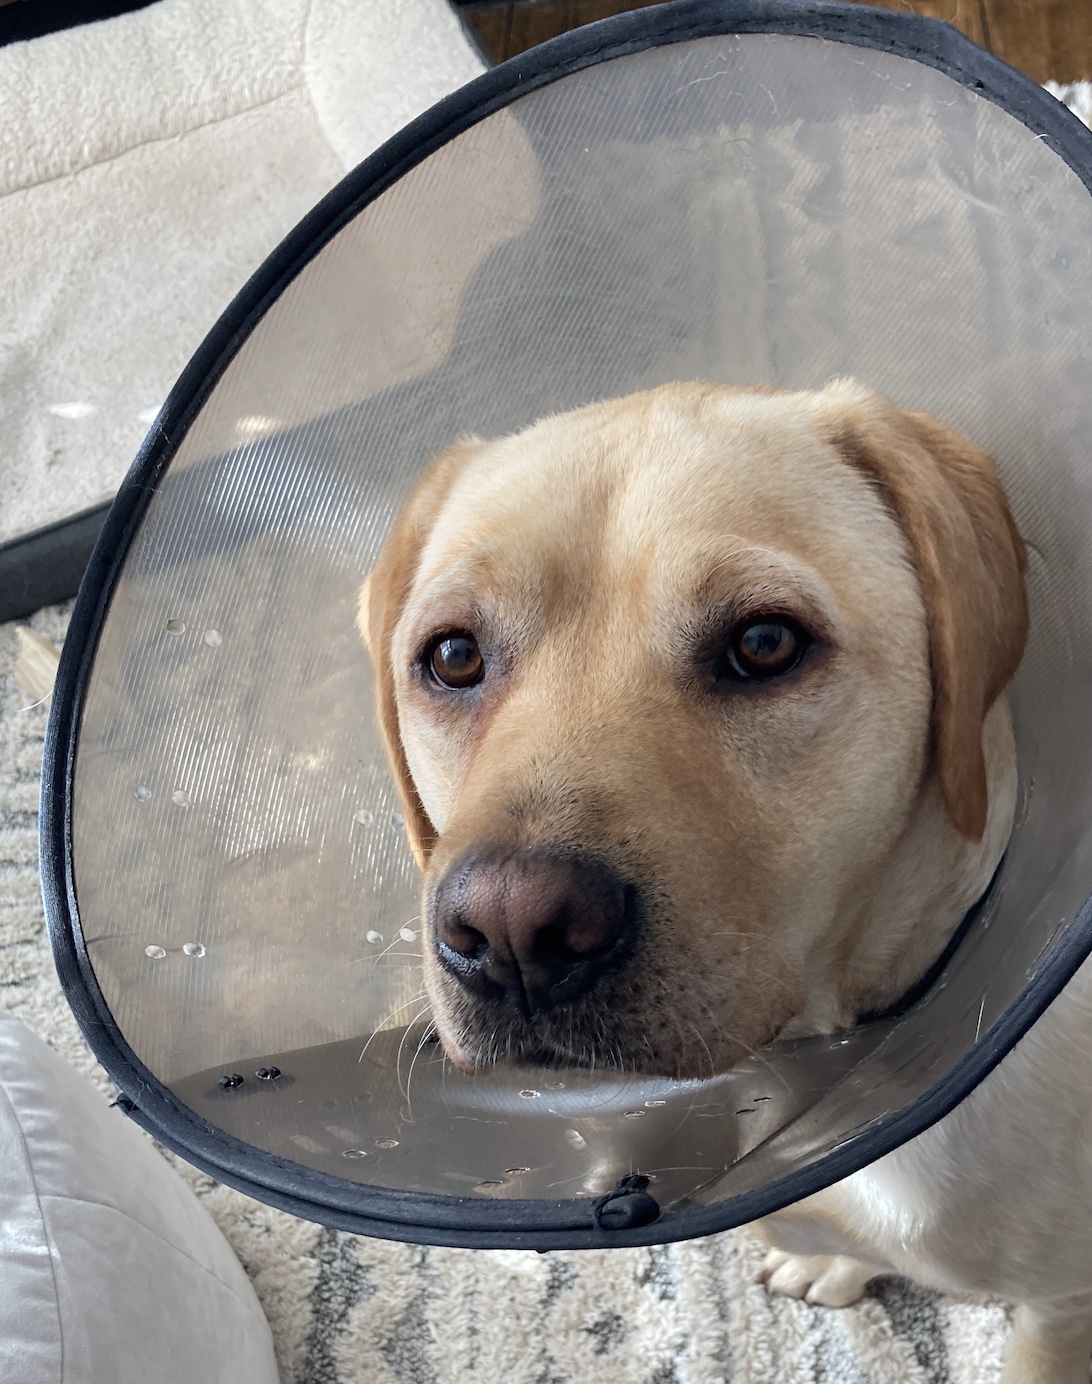 An image: The cone of shame